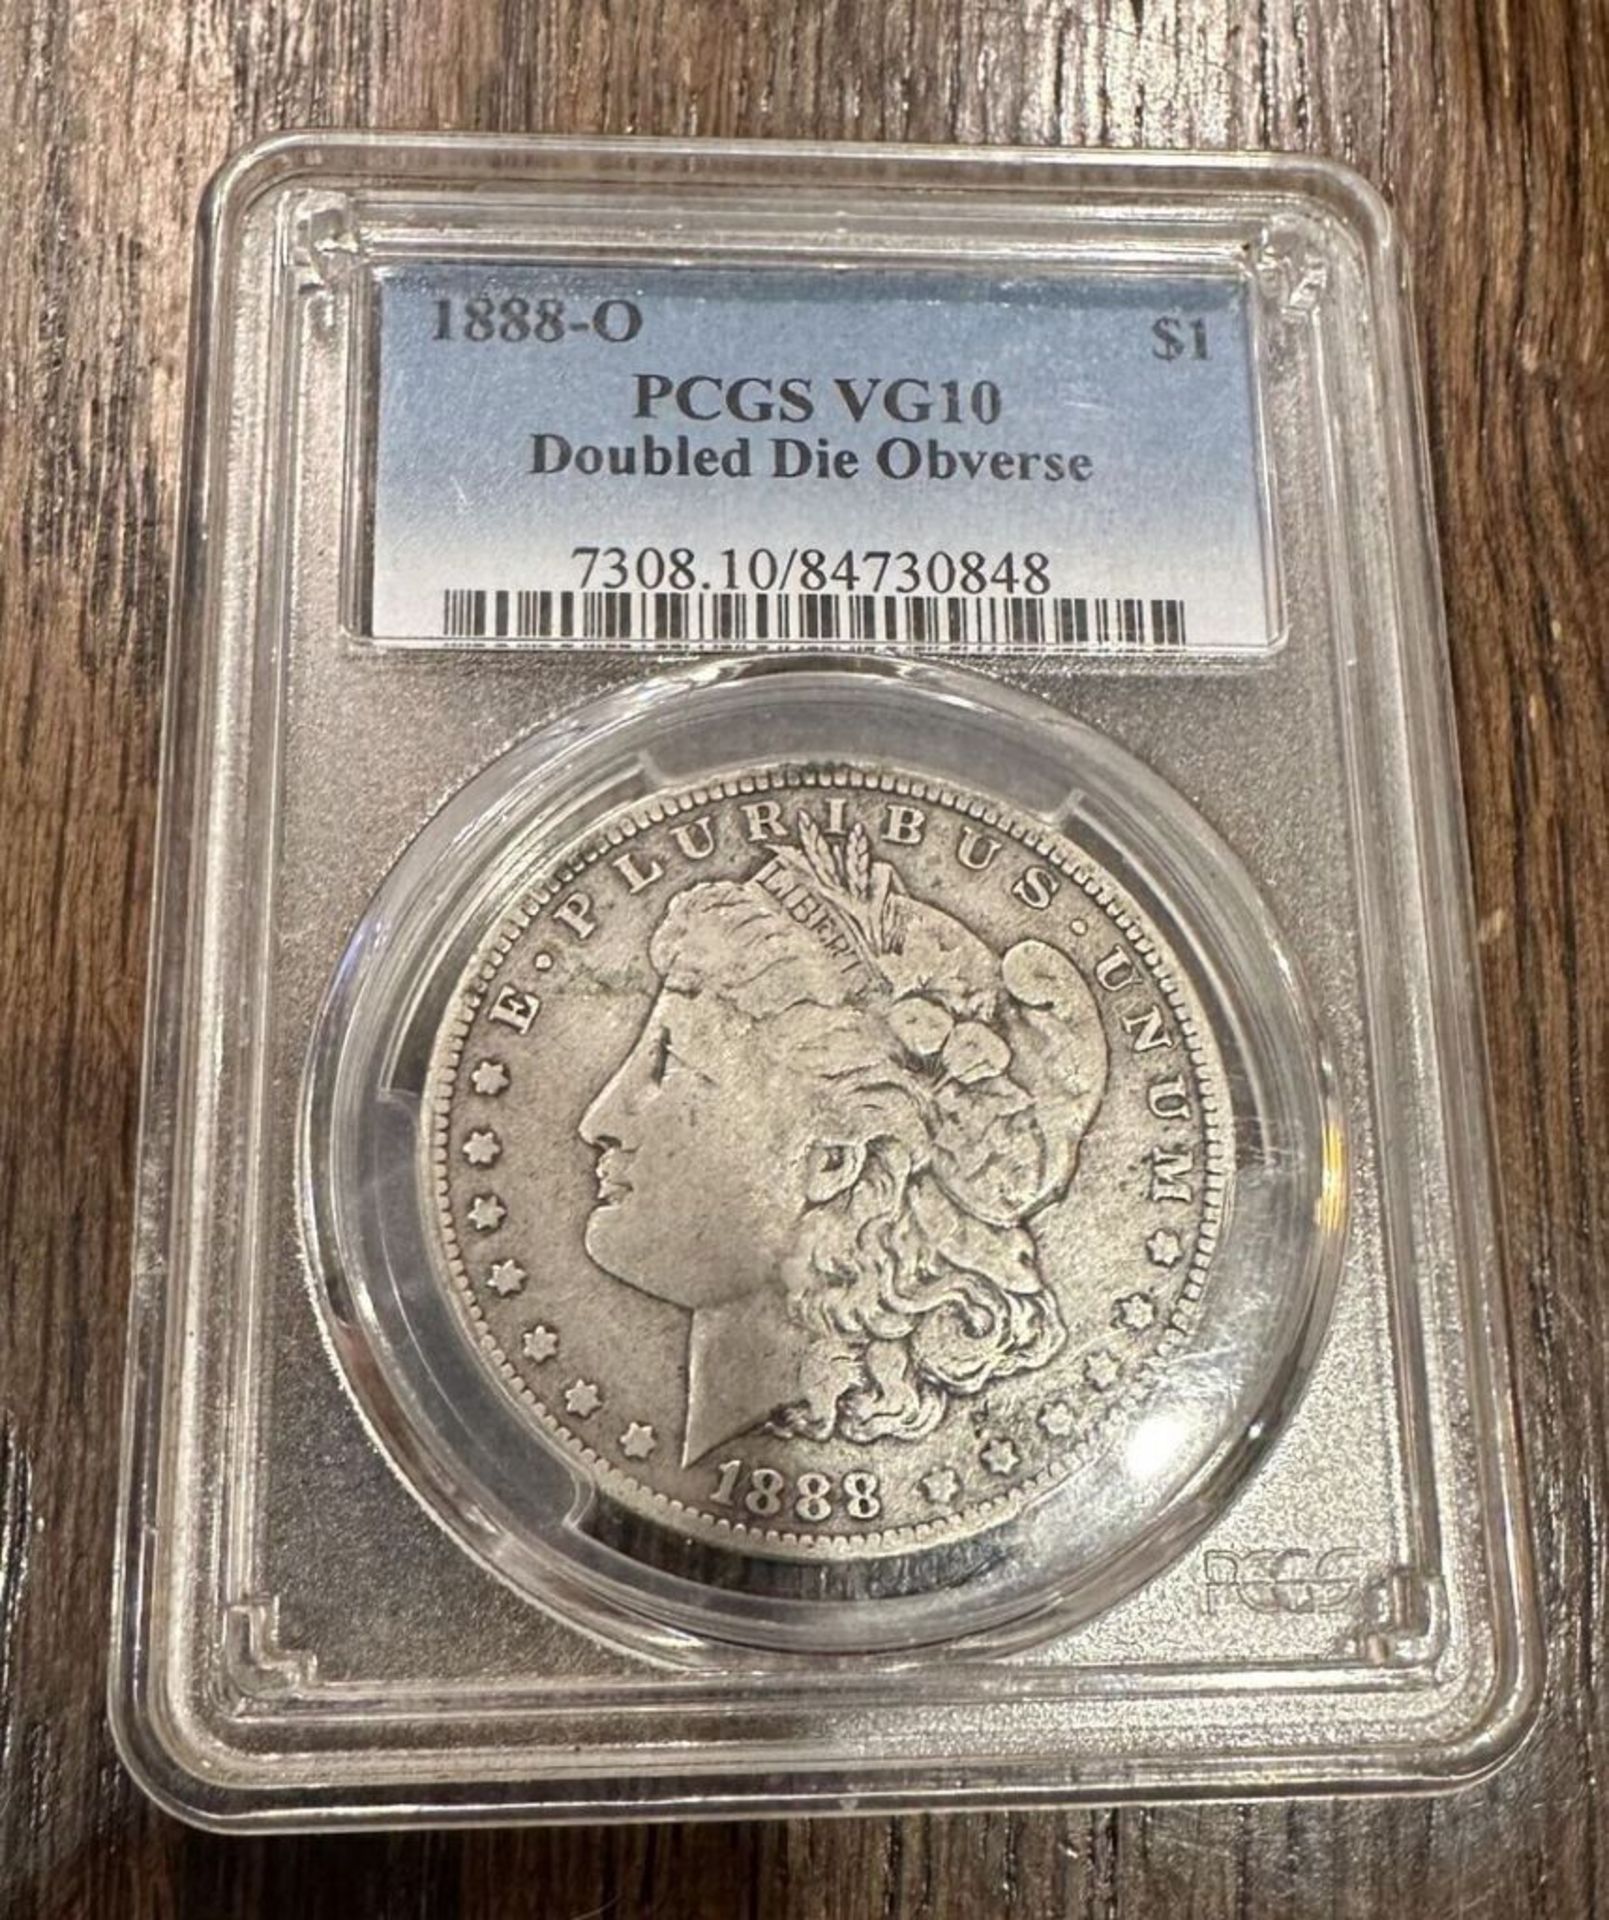 PCGS 1888-O DOUBLE DIE OBVERSE $1 COIN